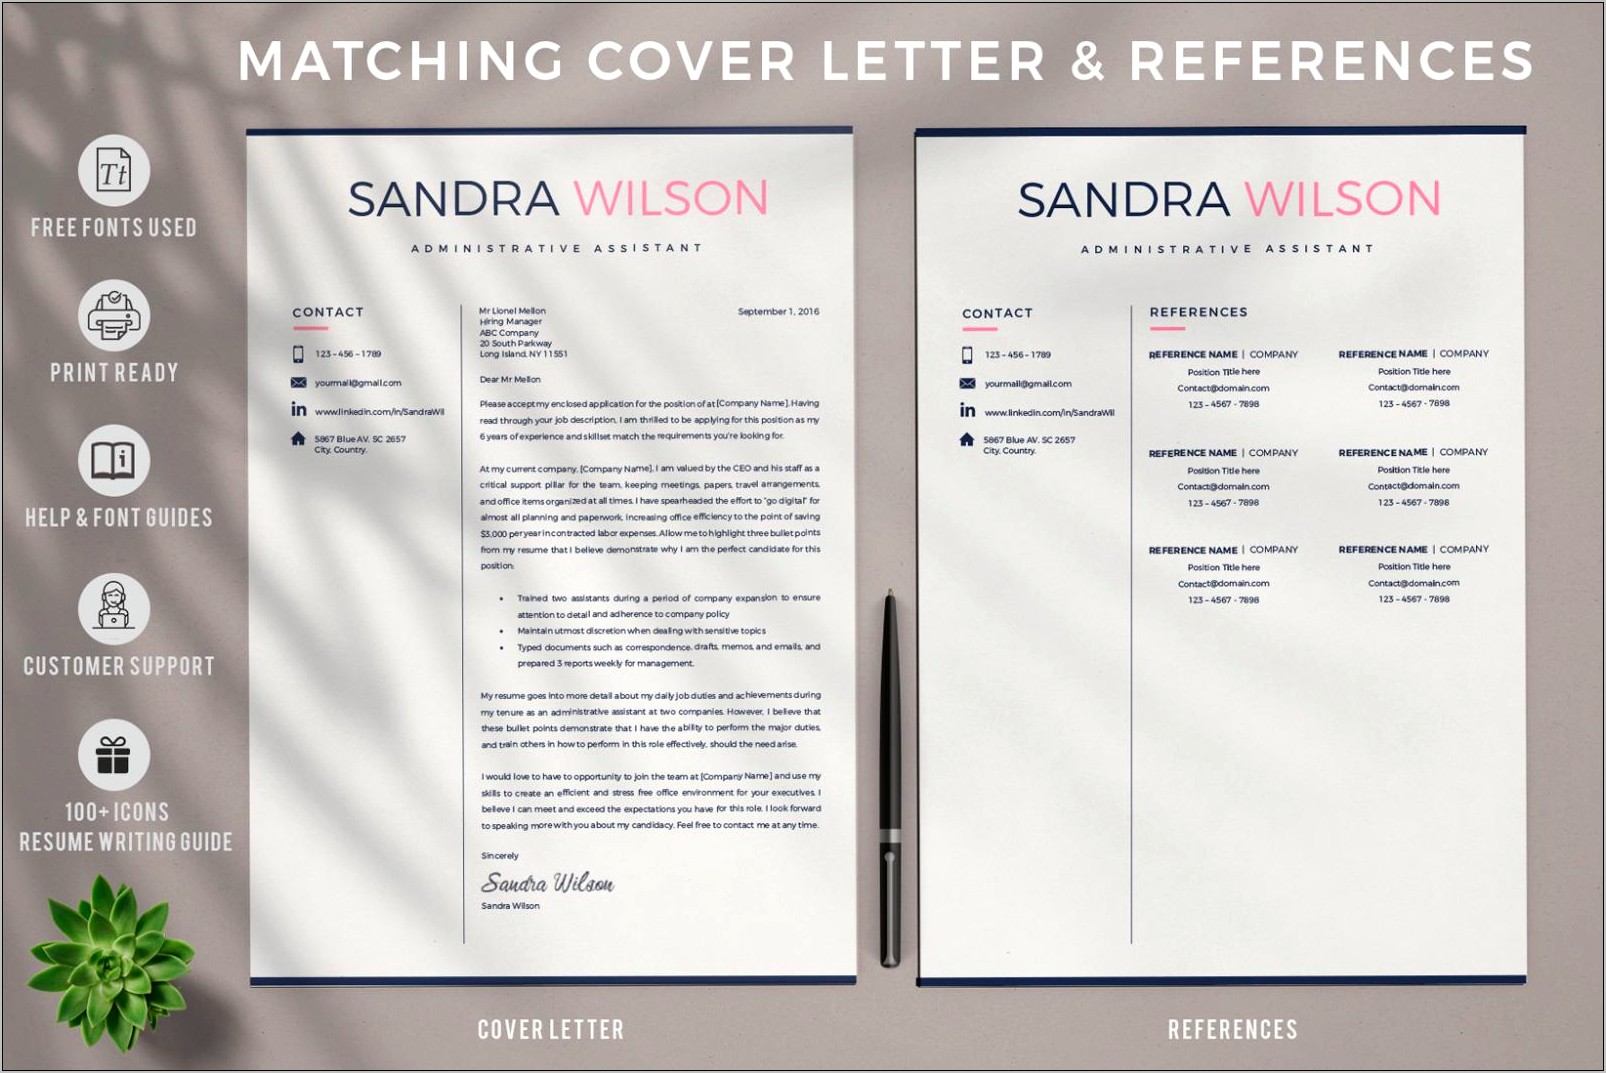 3 Piece Resume Cv Cover Letter Download Free